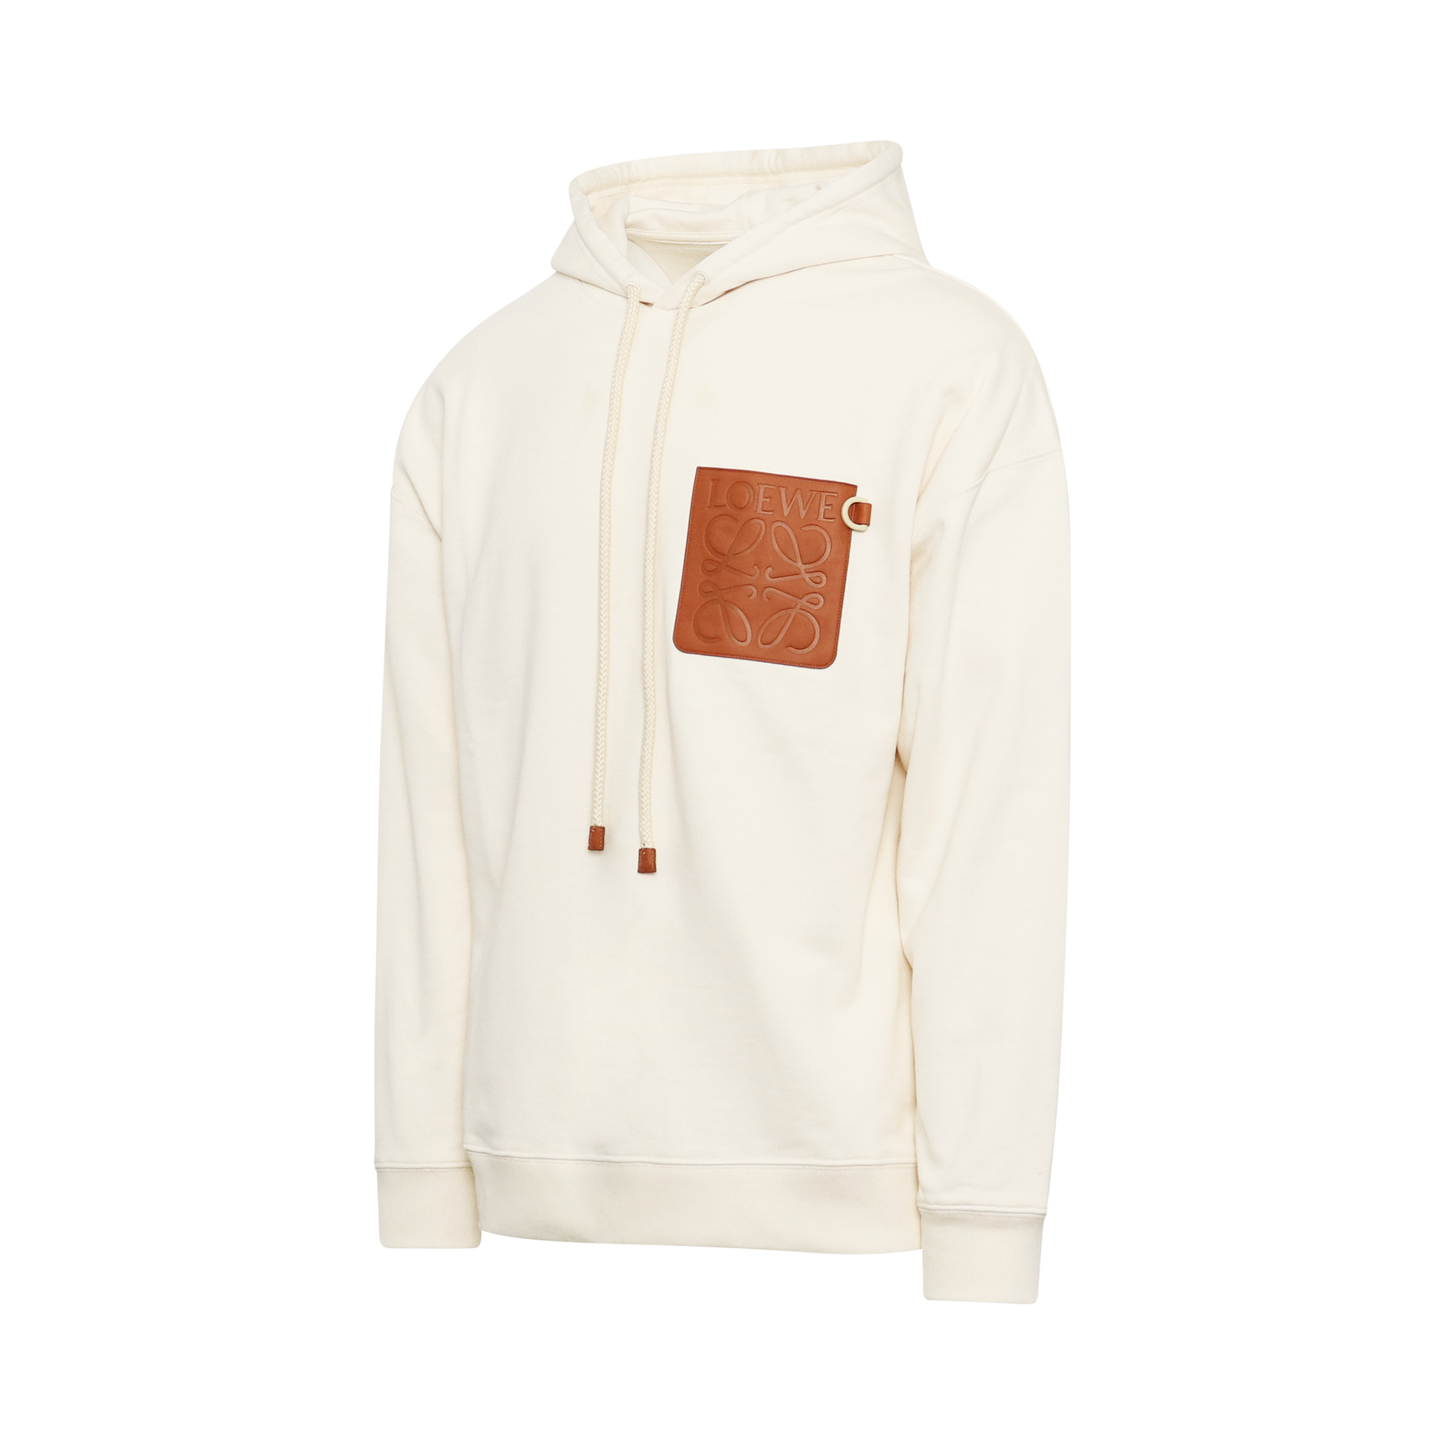 Anagram Leather Patch Hoodie in White Ash